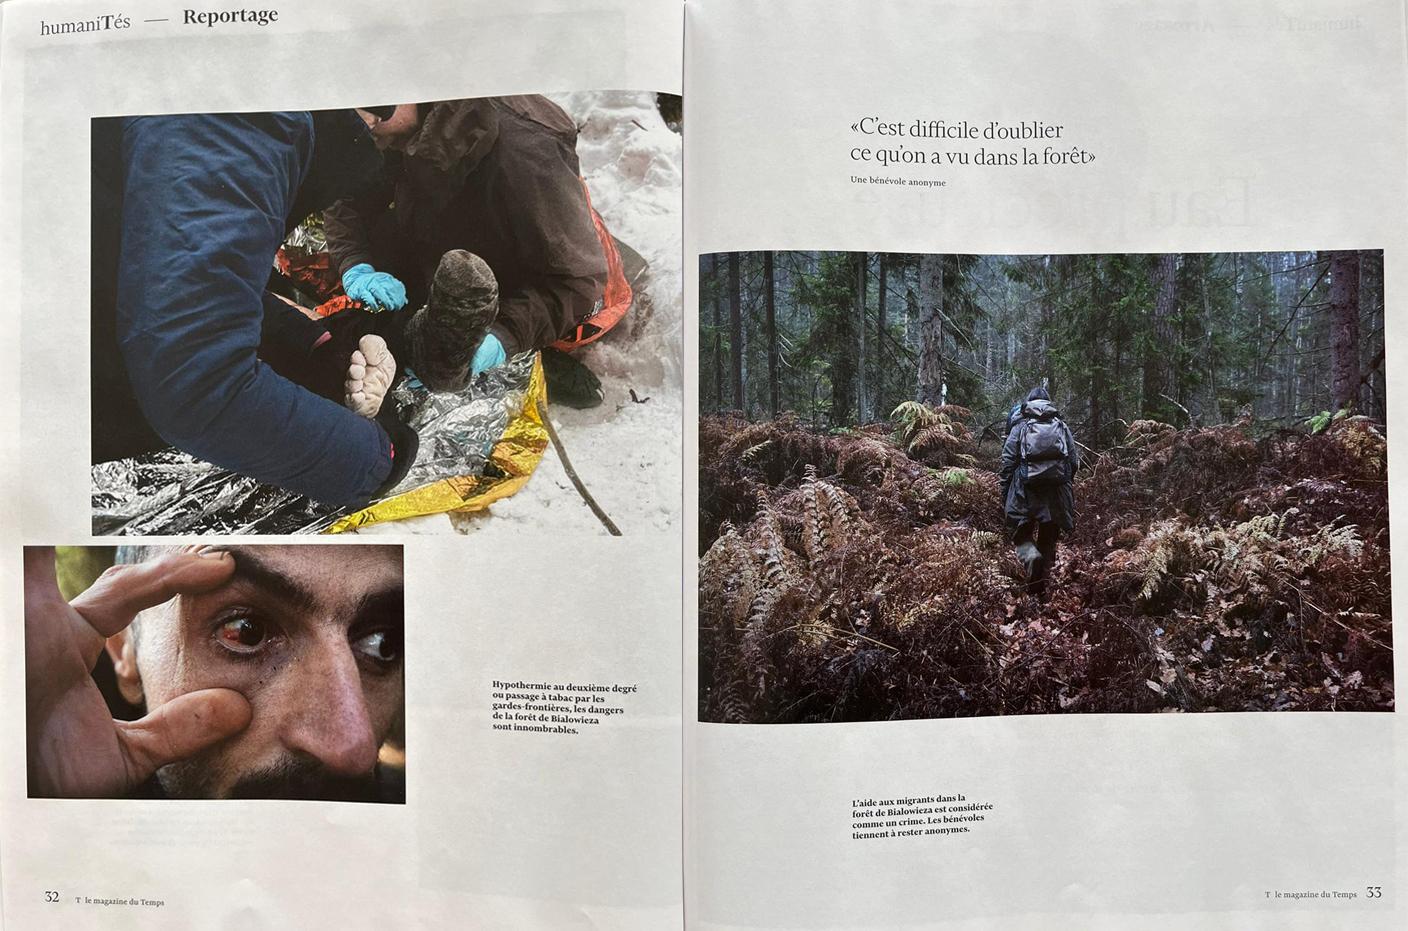 Magazine Le Temps publishes my photoreportage about refugees in Bialowieza Forest